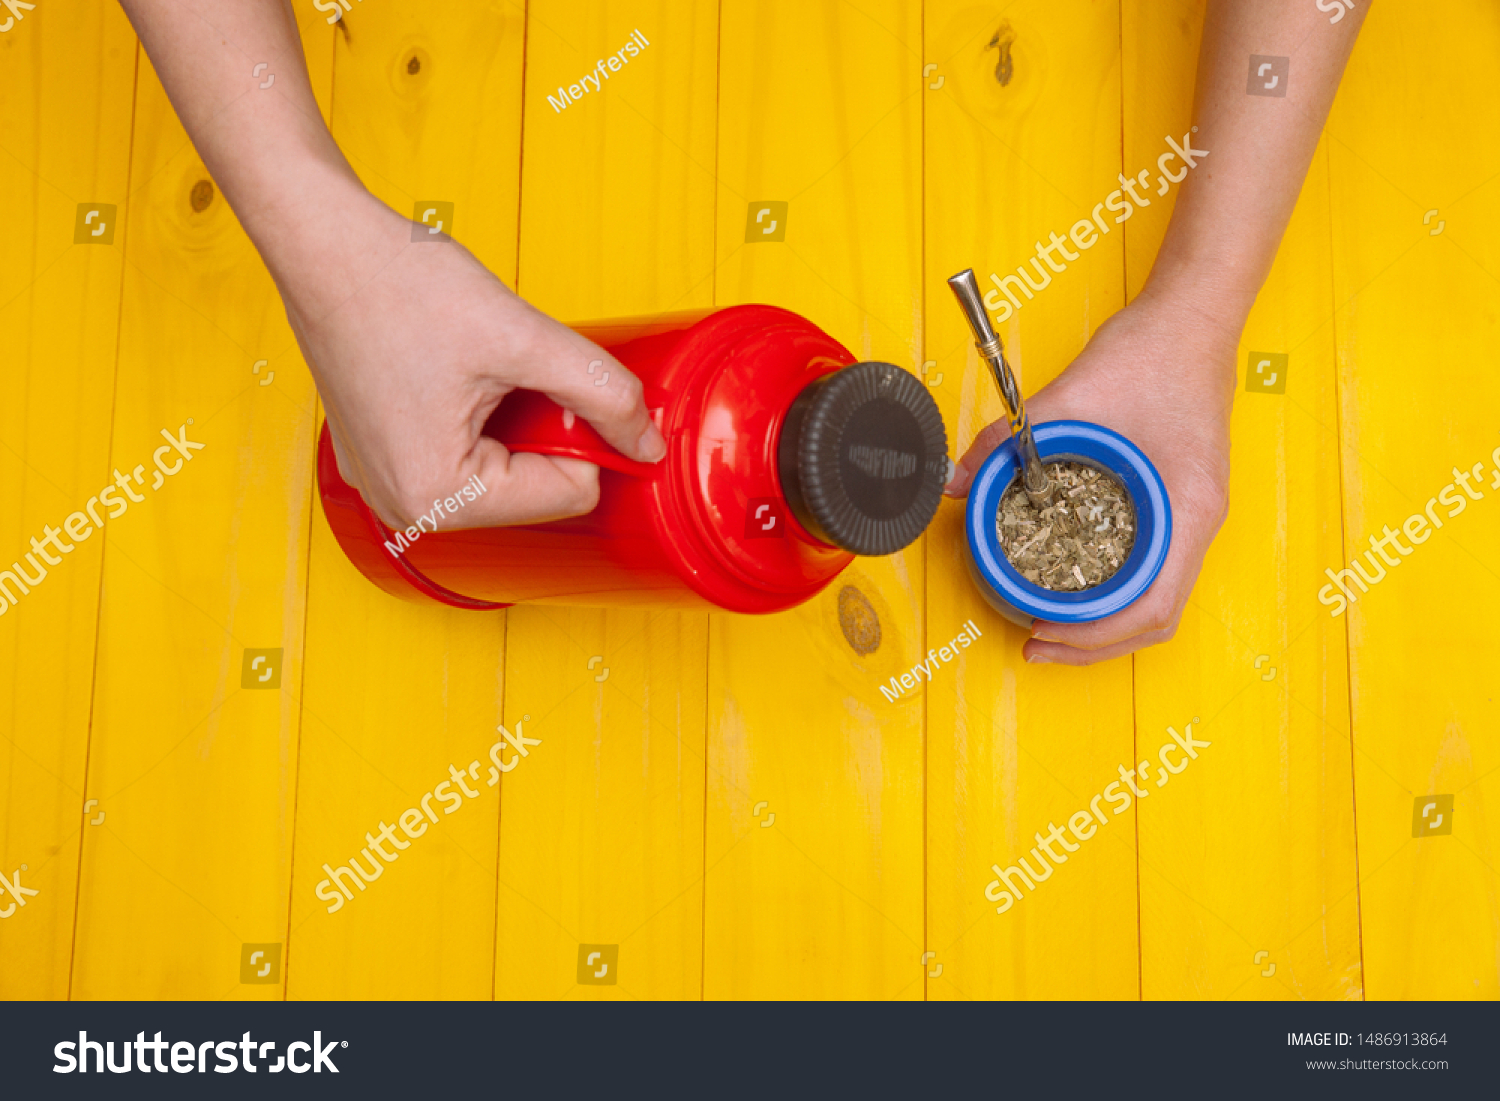 Download Blue Matte Red Thermos Yellow Wooden Food And Drink Stock Image 1486913864 PSD Mockup Templates